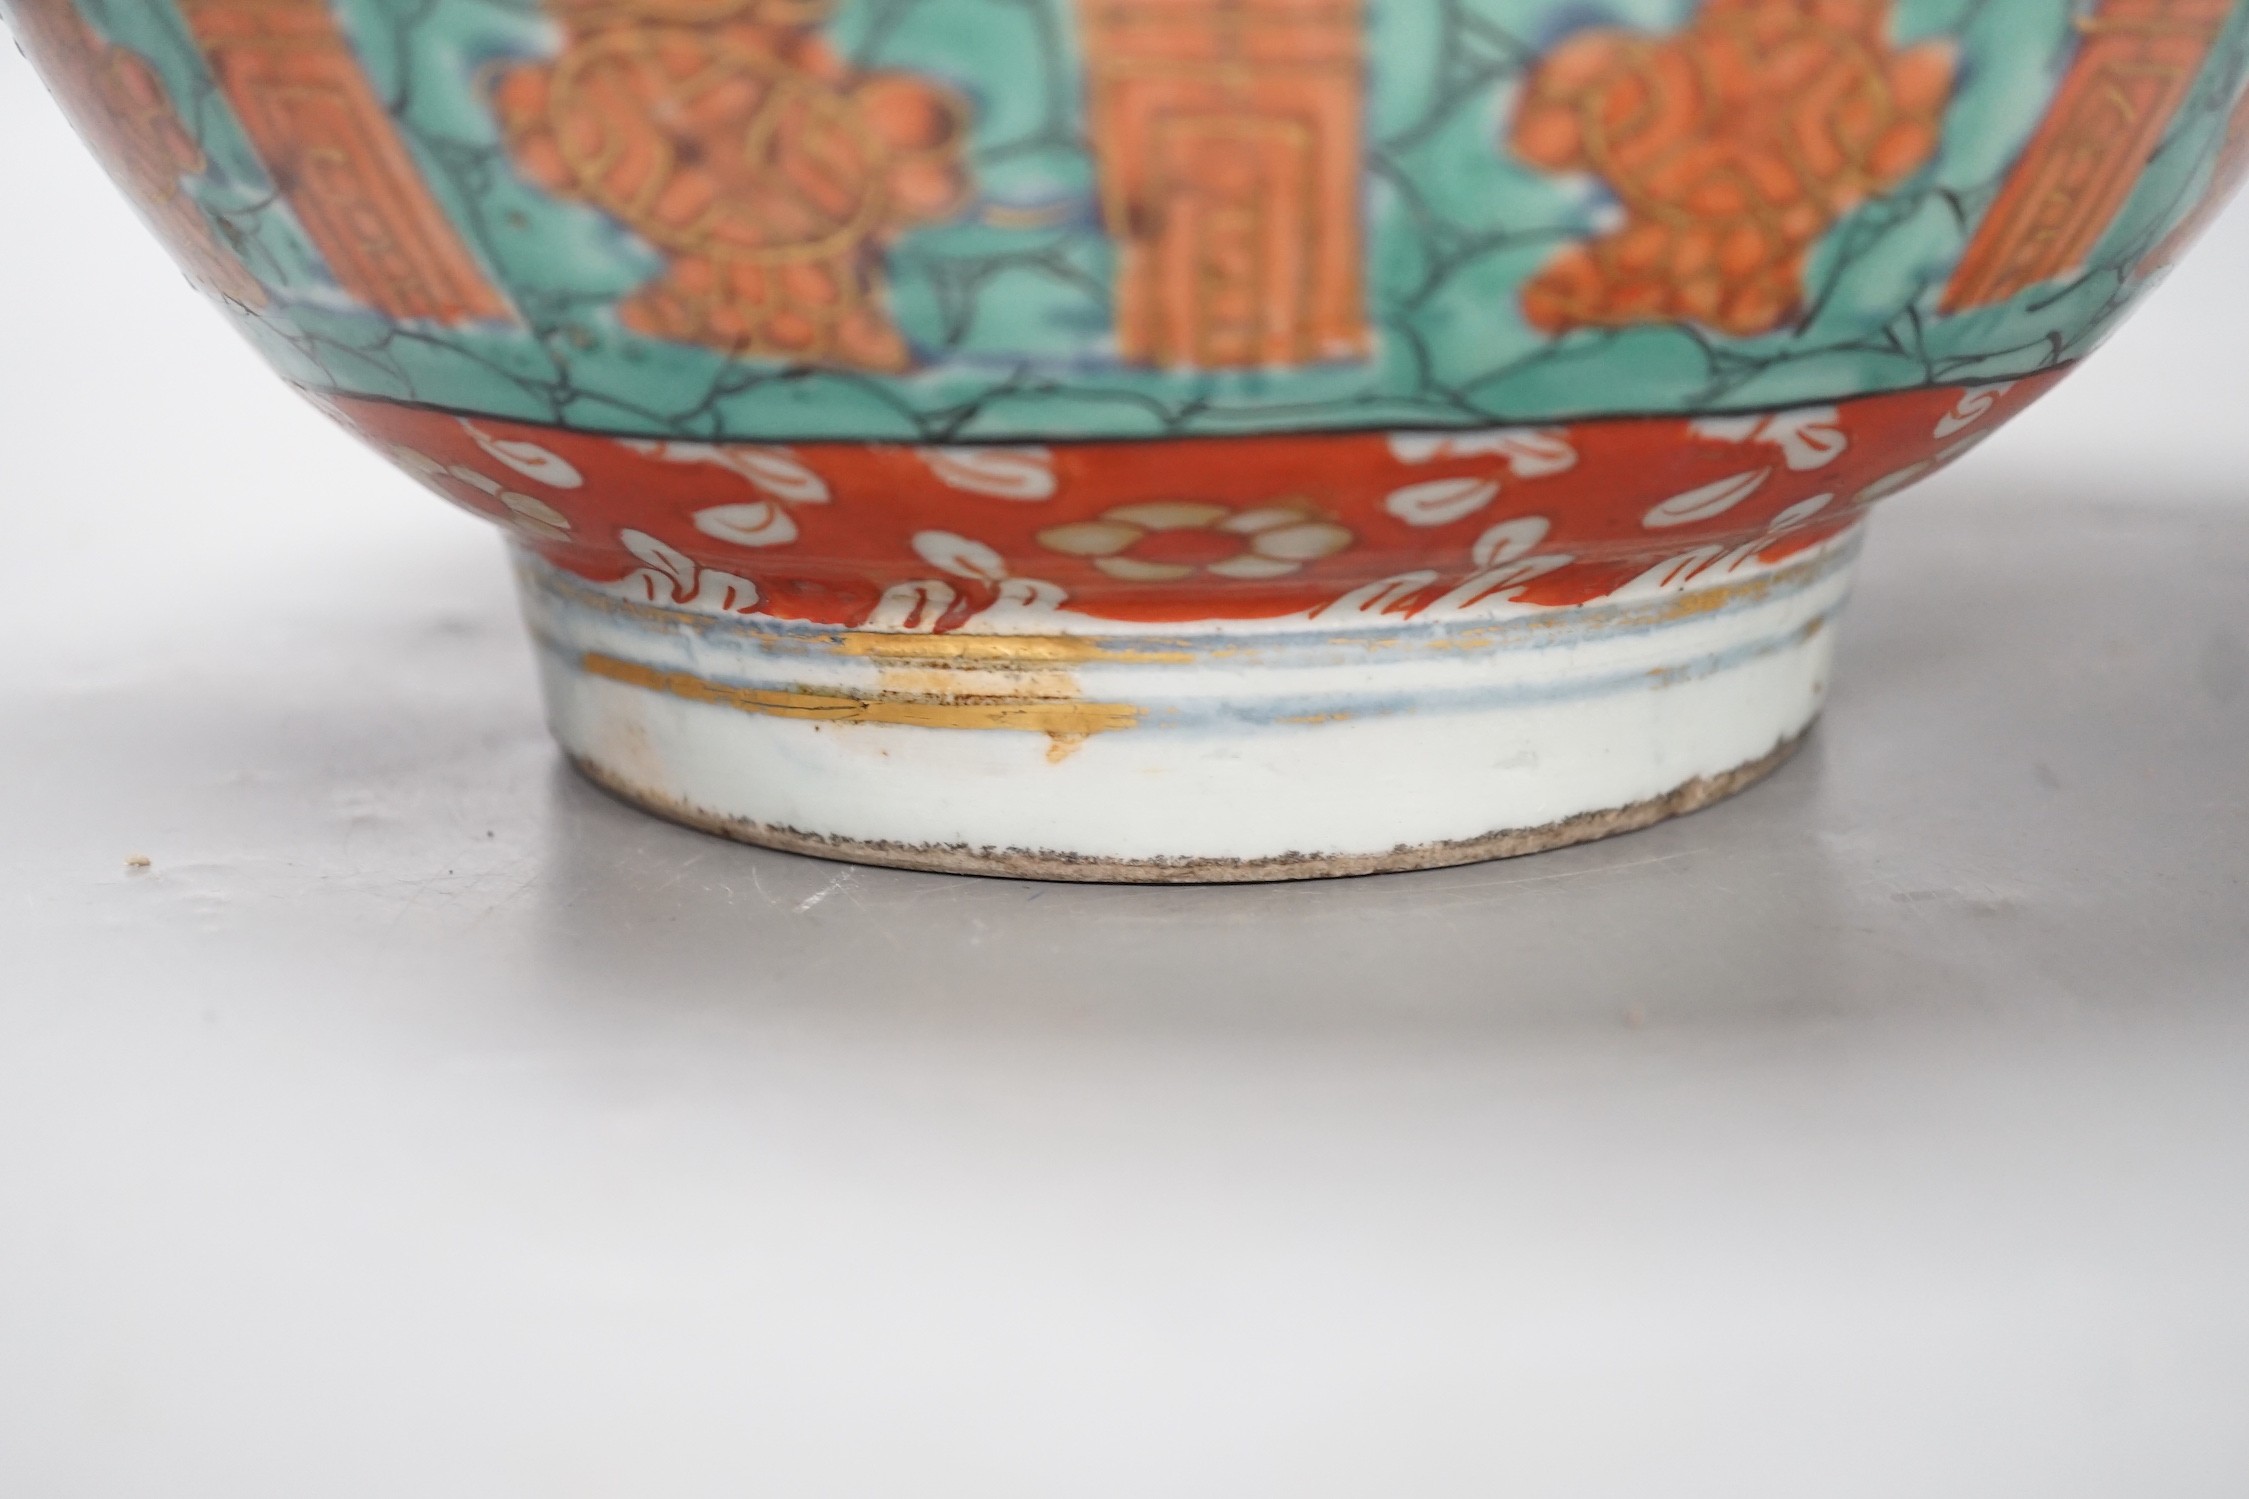 An 18th century clobbered Chinese or Japanese porcelain bowl, 24.5cm diameter